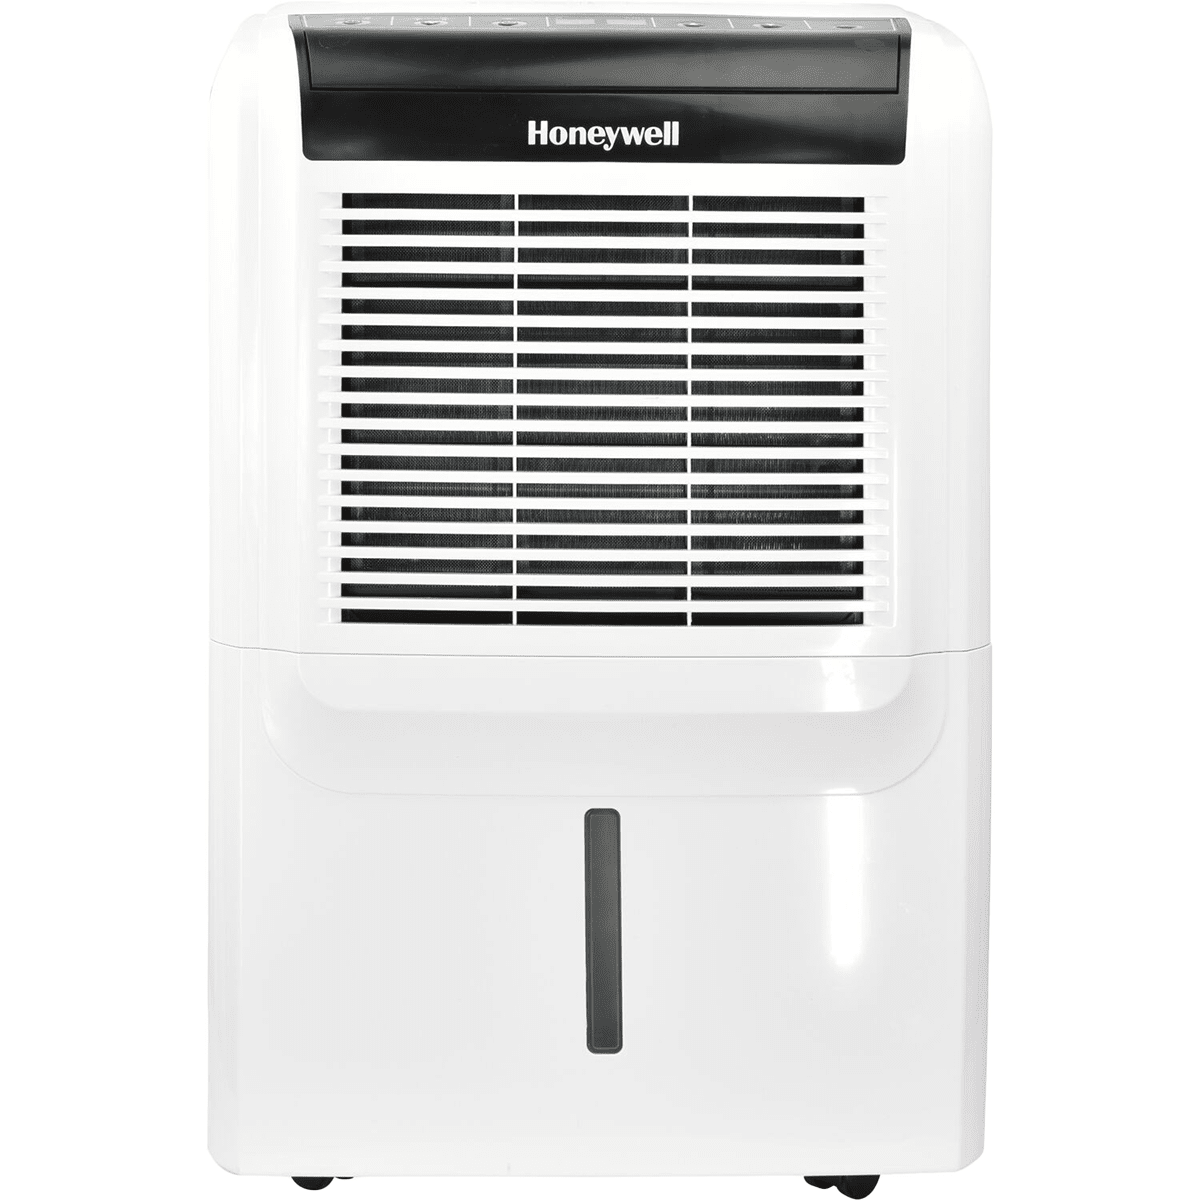 Honeywell 45 Pint Portable Dehumidifier - Without Pump